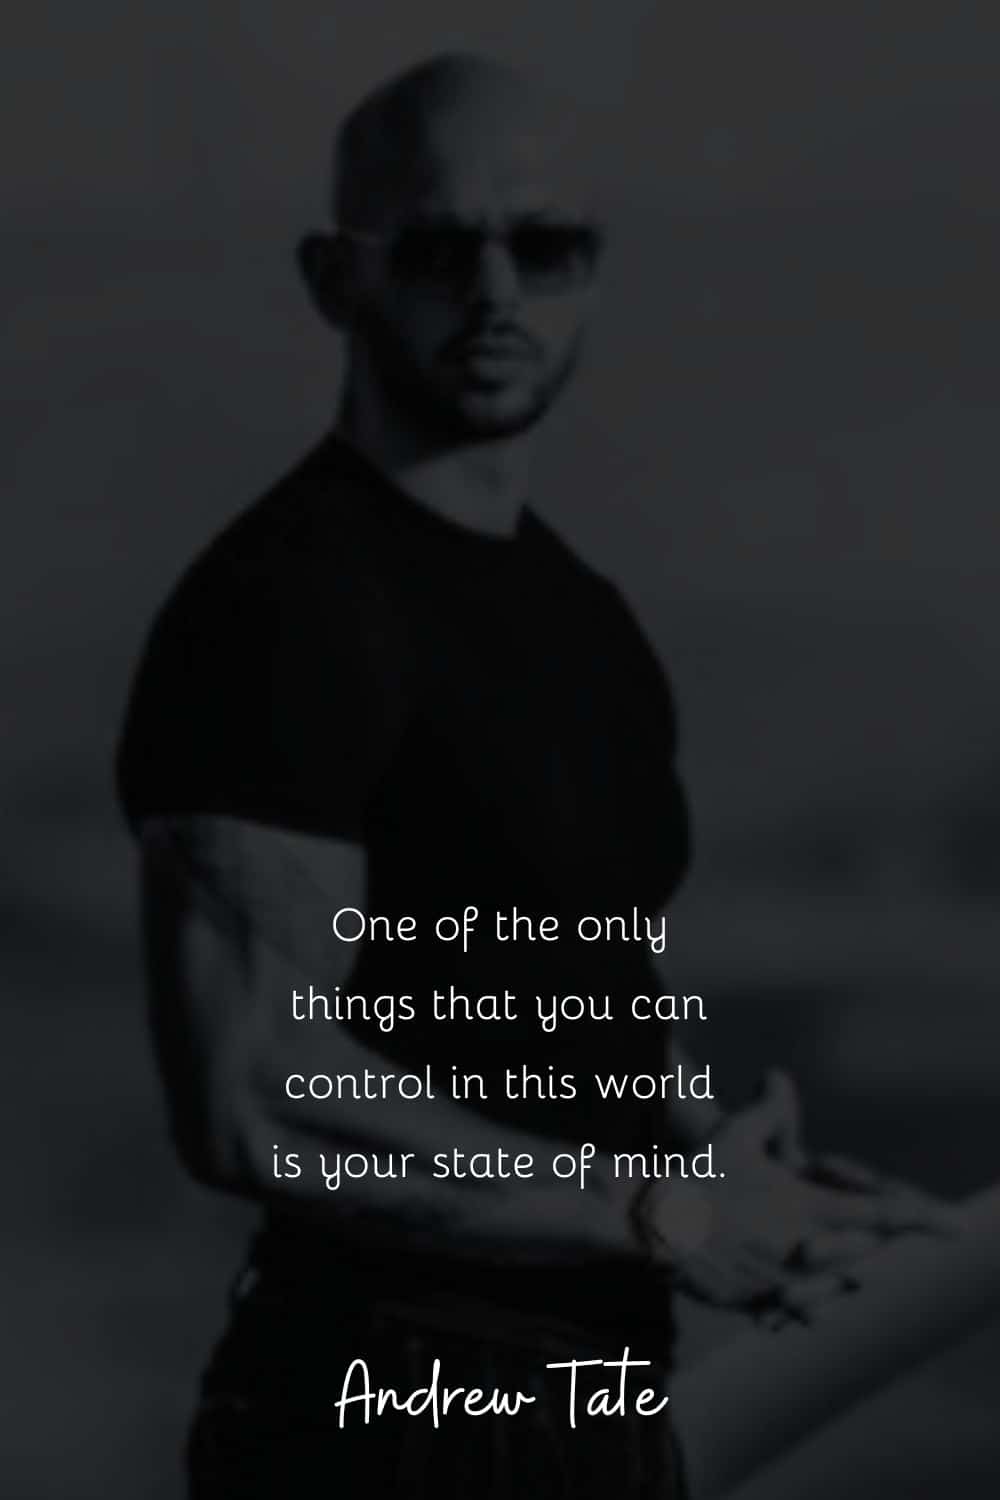 One of the only things that you can control in this world is your state of mind